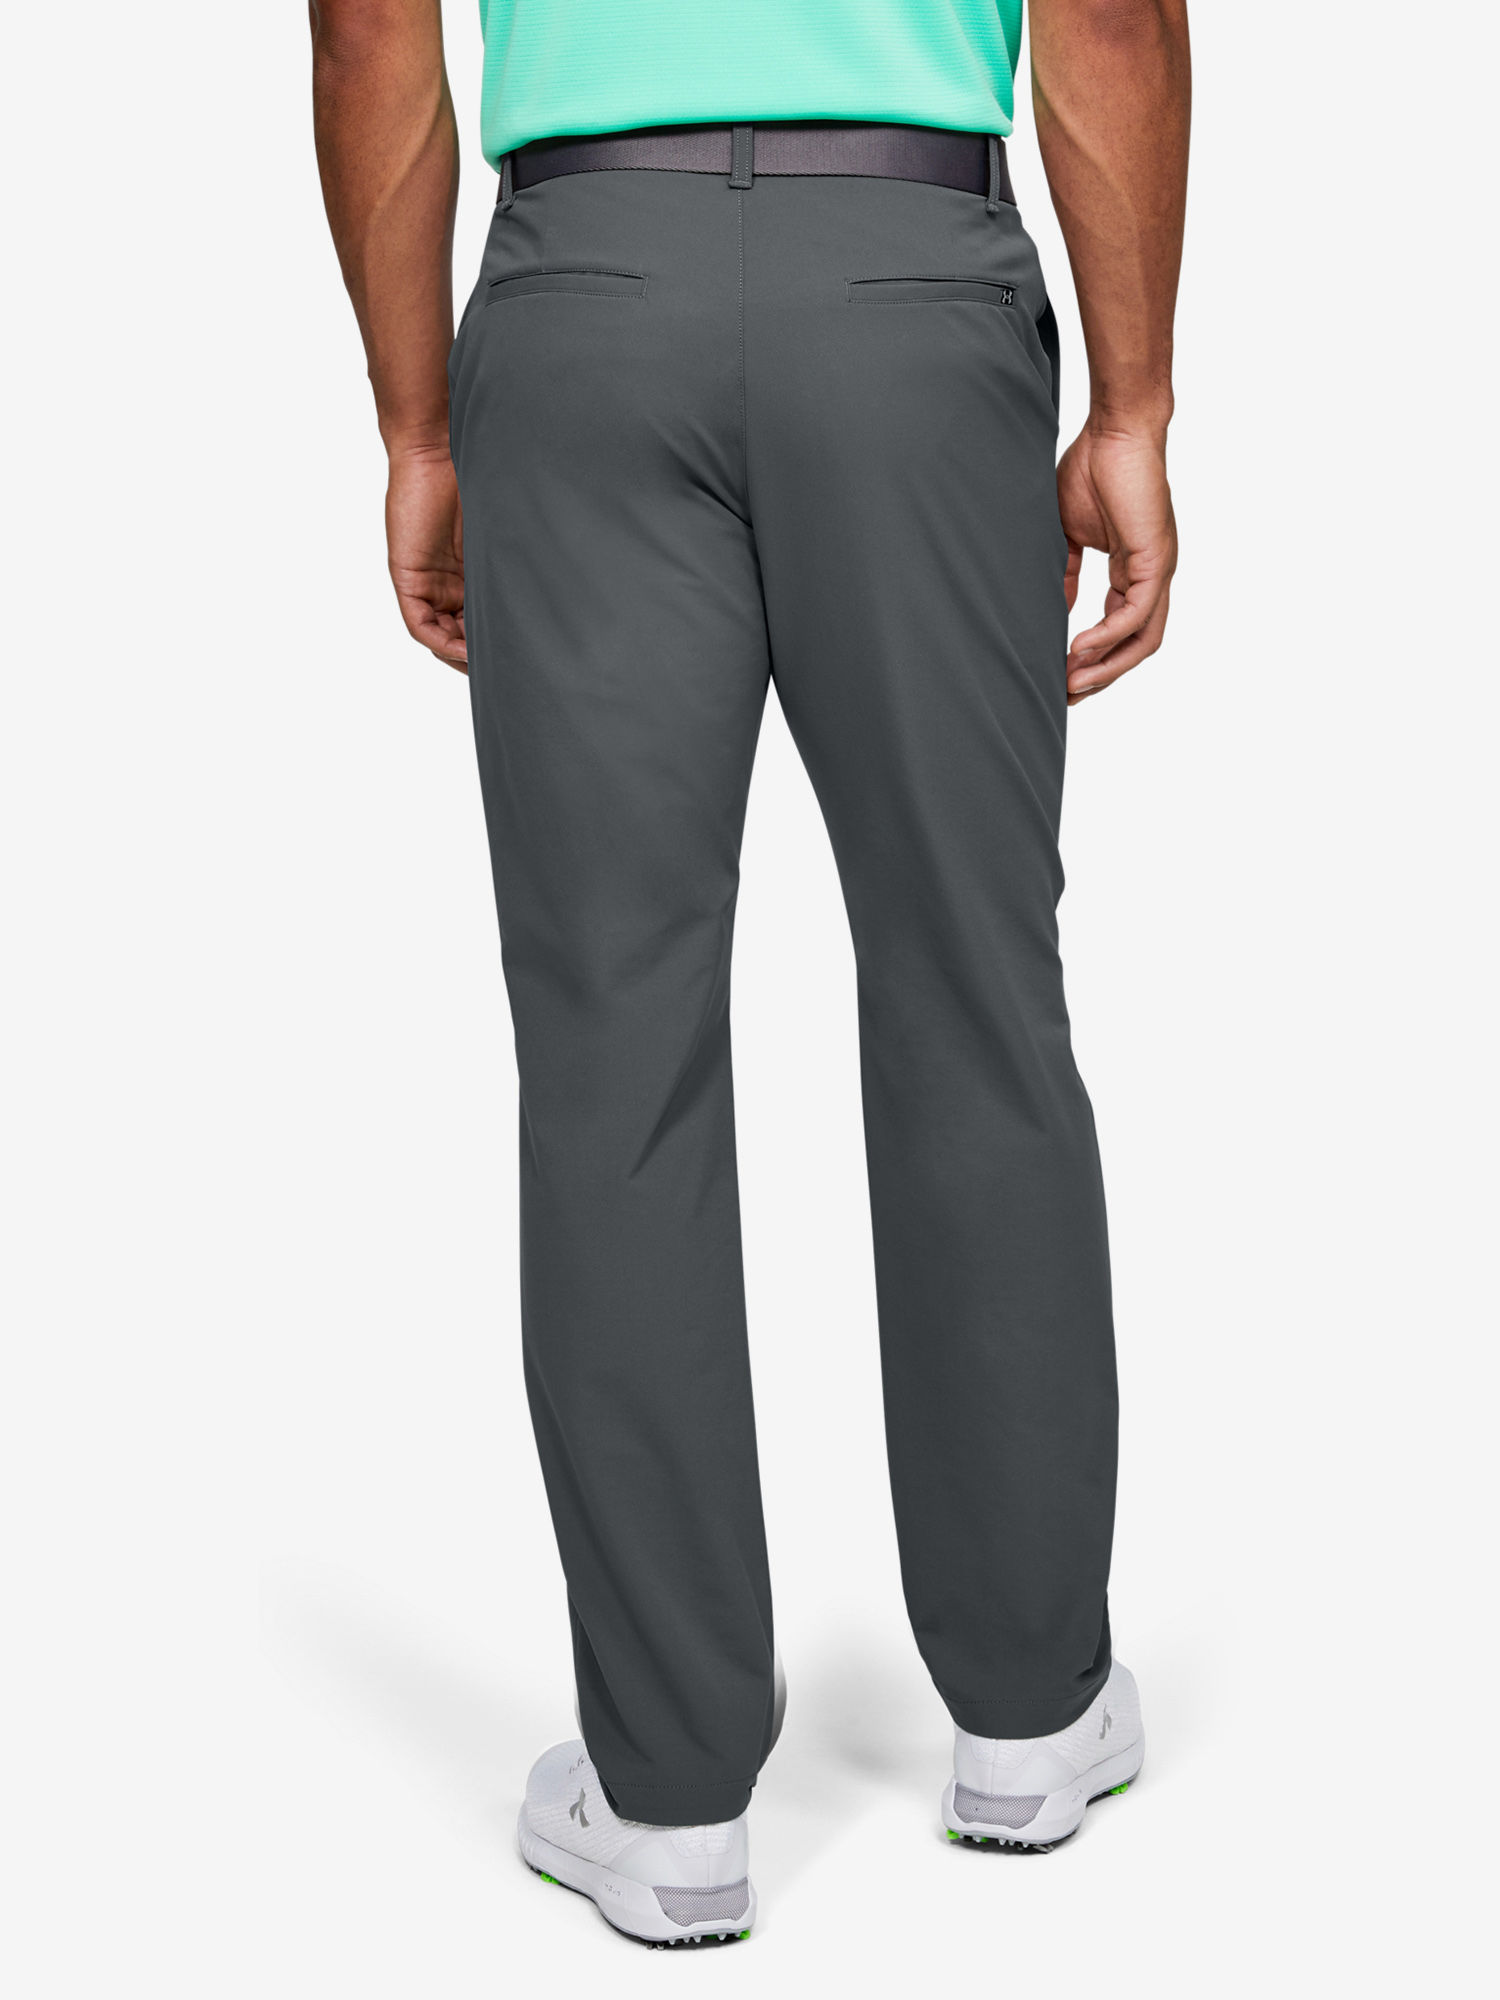 Kalhoty Under Armour Tech Pant-GRY (2)